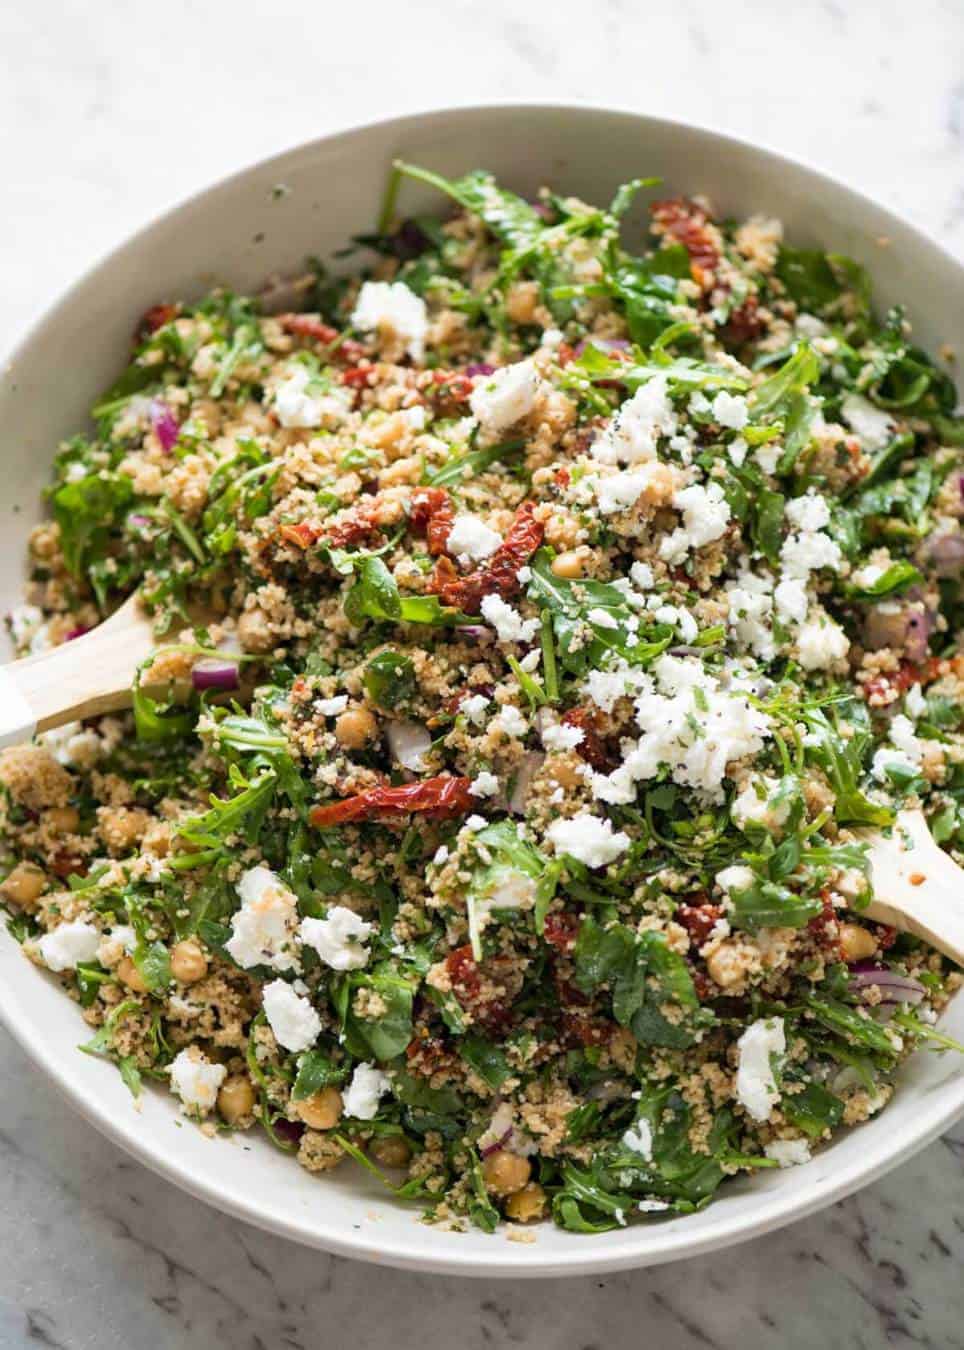 The best 12 minute salad in the world: Couscous Salad with Sun Dried Tomatoes and Feta www.recipetineats.com